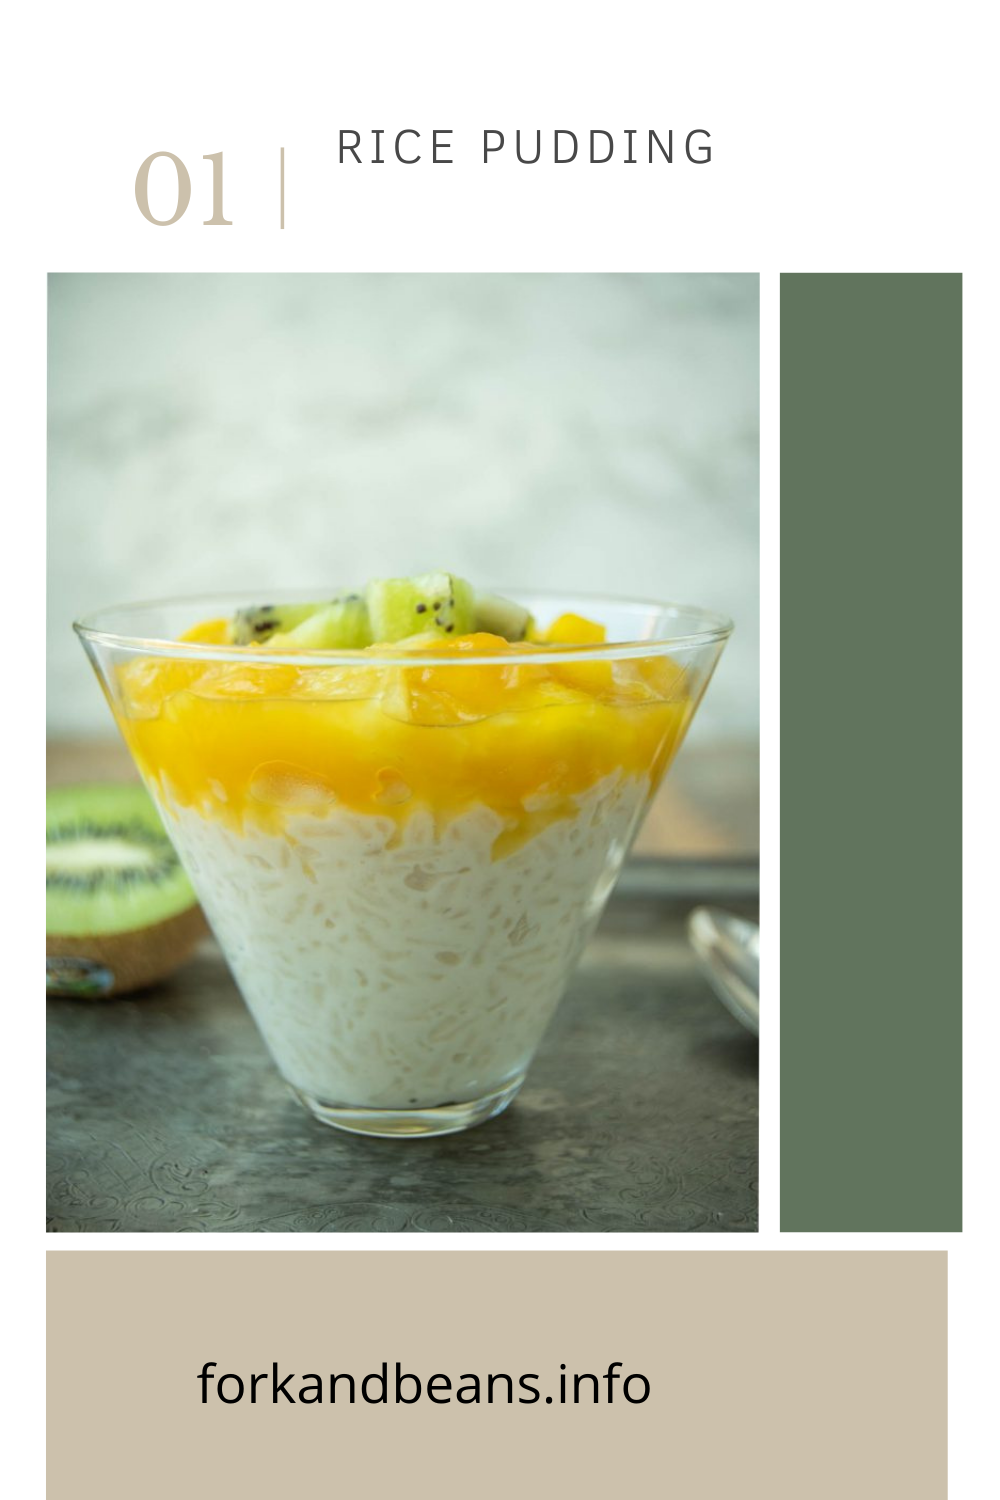 TROPICAL PUDDING OF RICE